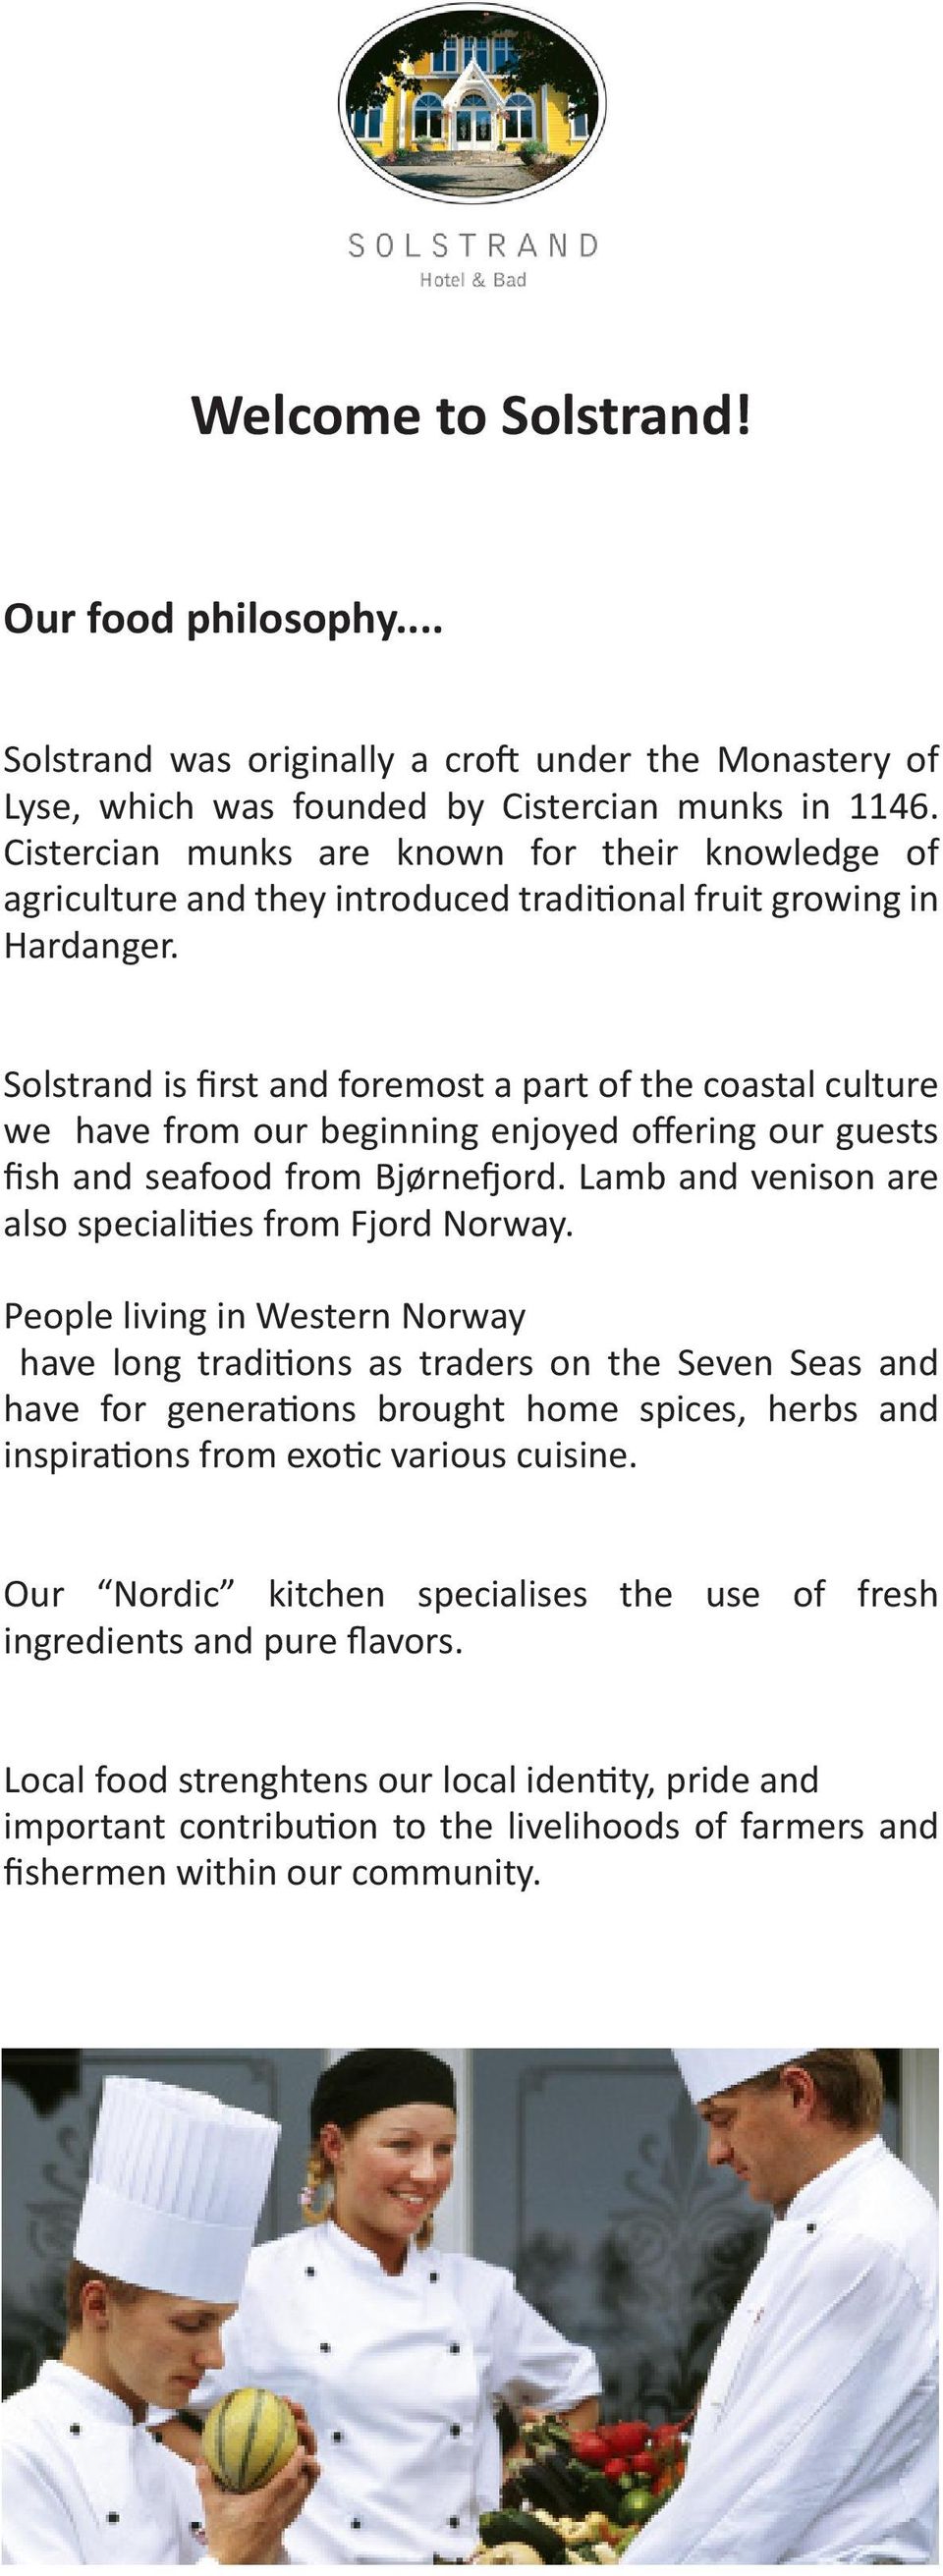 Solstrand is first and foremost a part of the coastal culture we have from our beginning enjoyed offering our guests fish and seafood from Bjørnefjord.